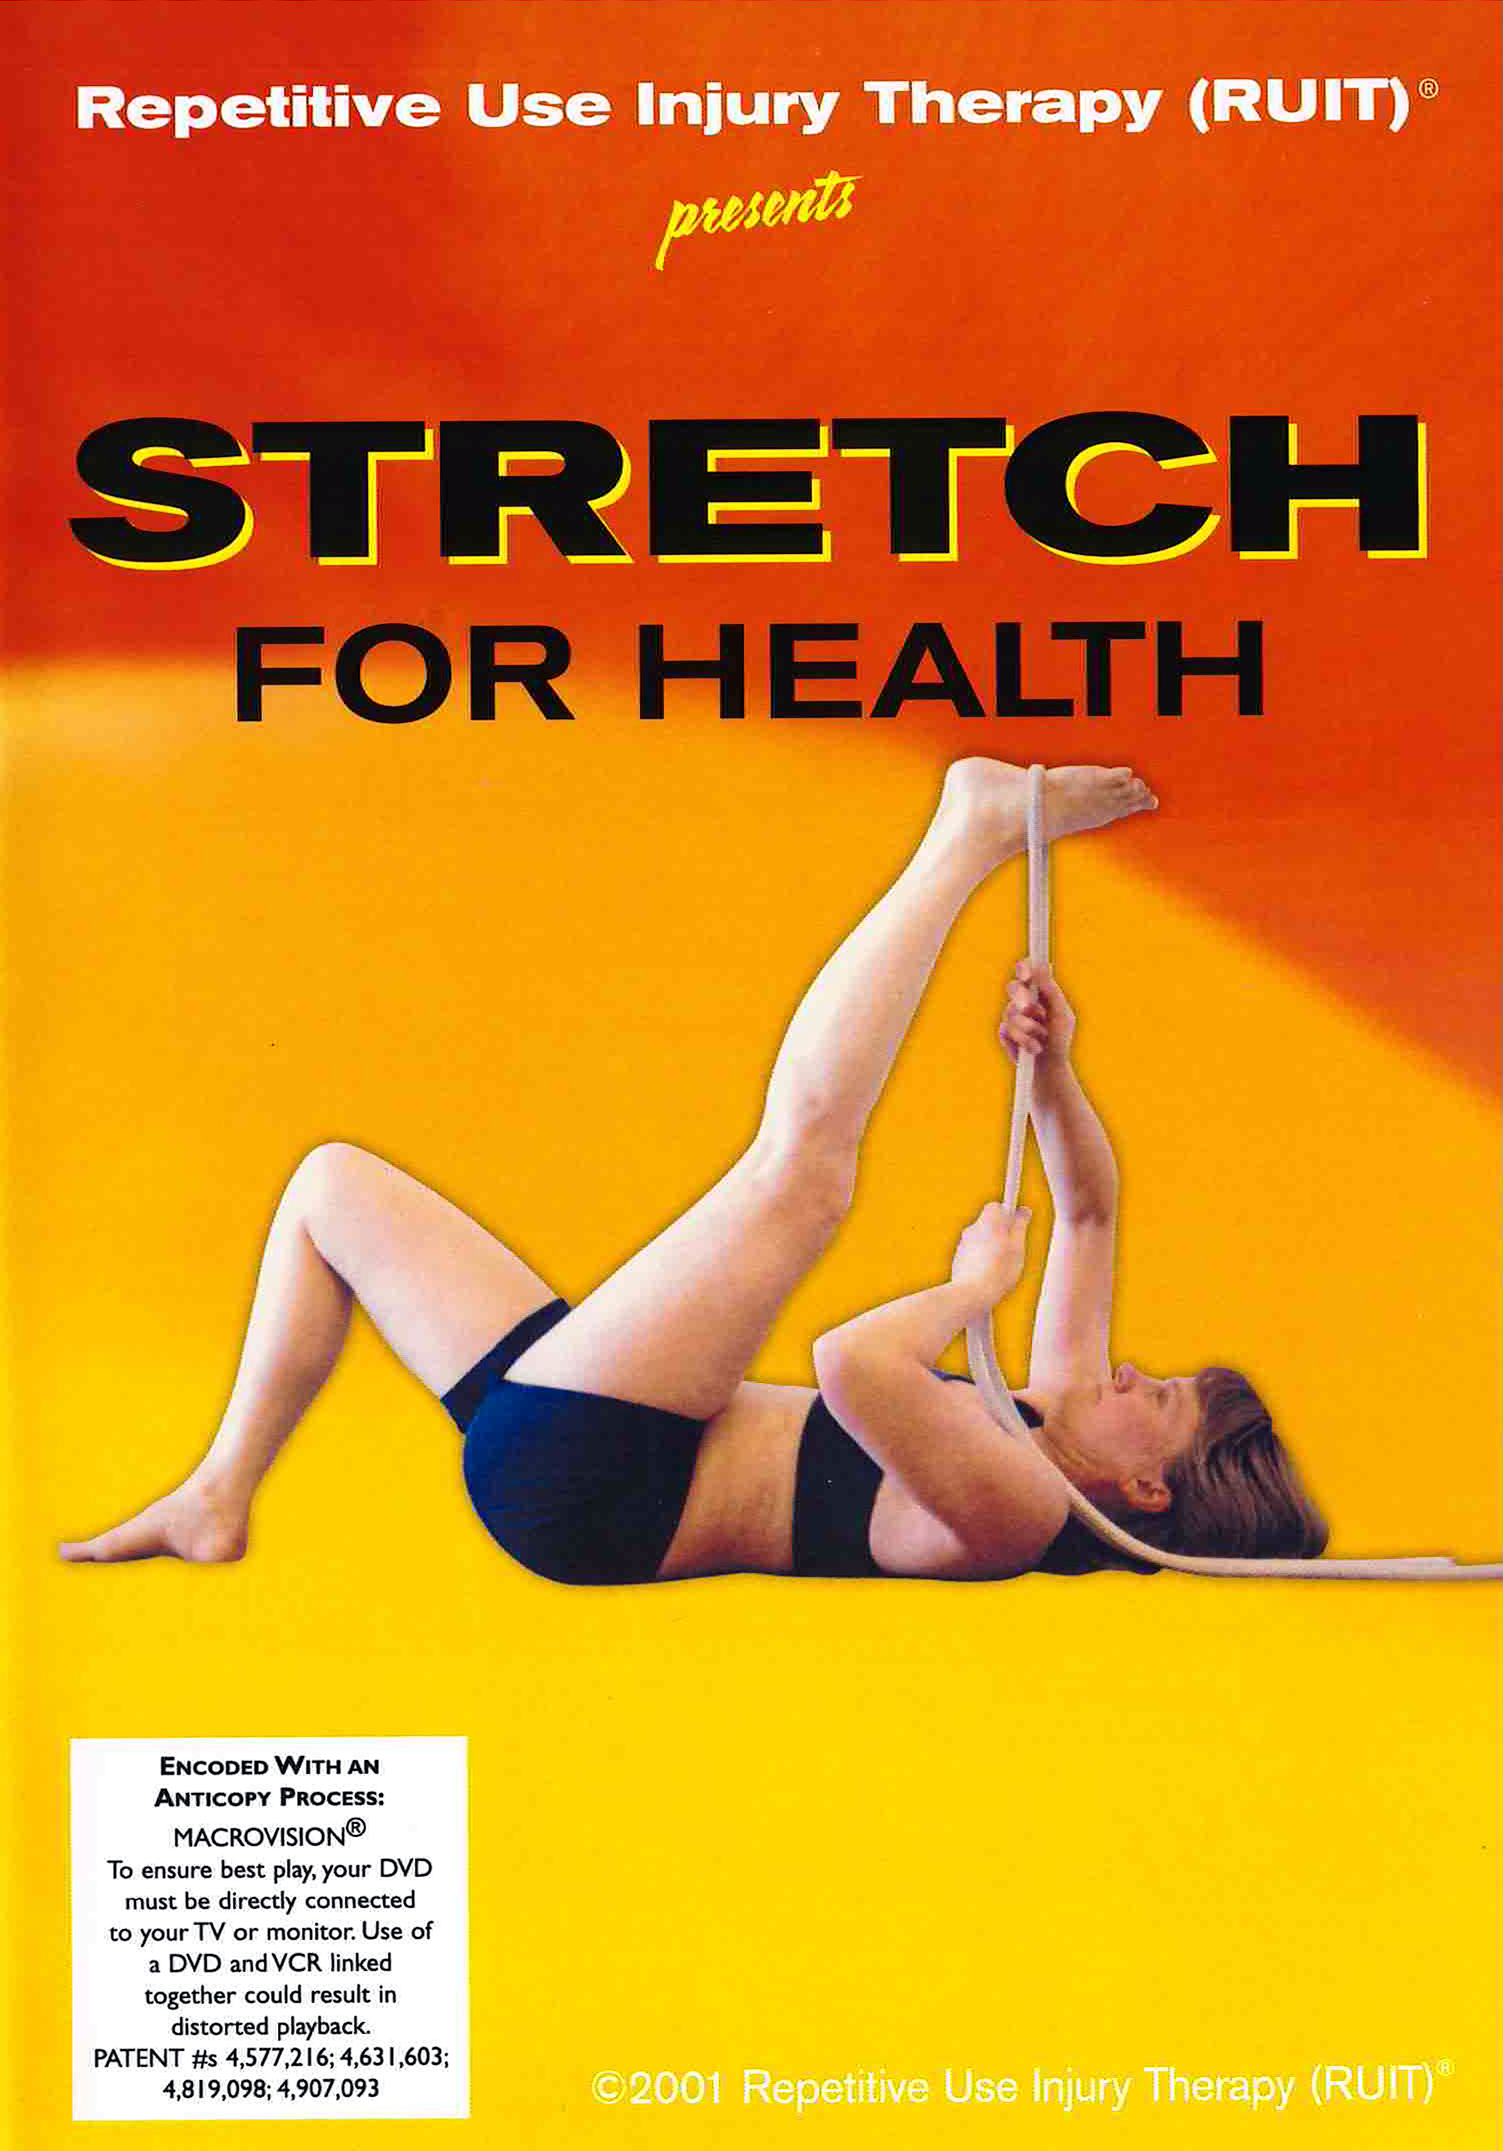 Simply Stretch DVD Enter a tranquil setting and experience gentle